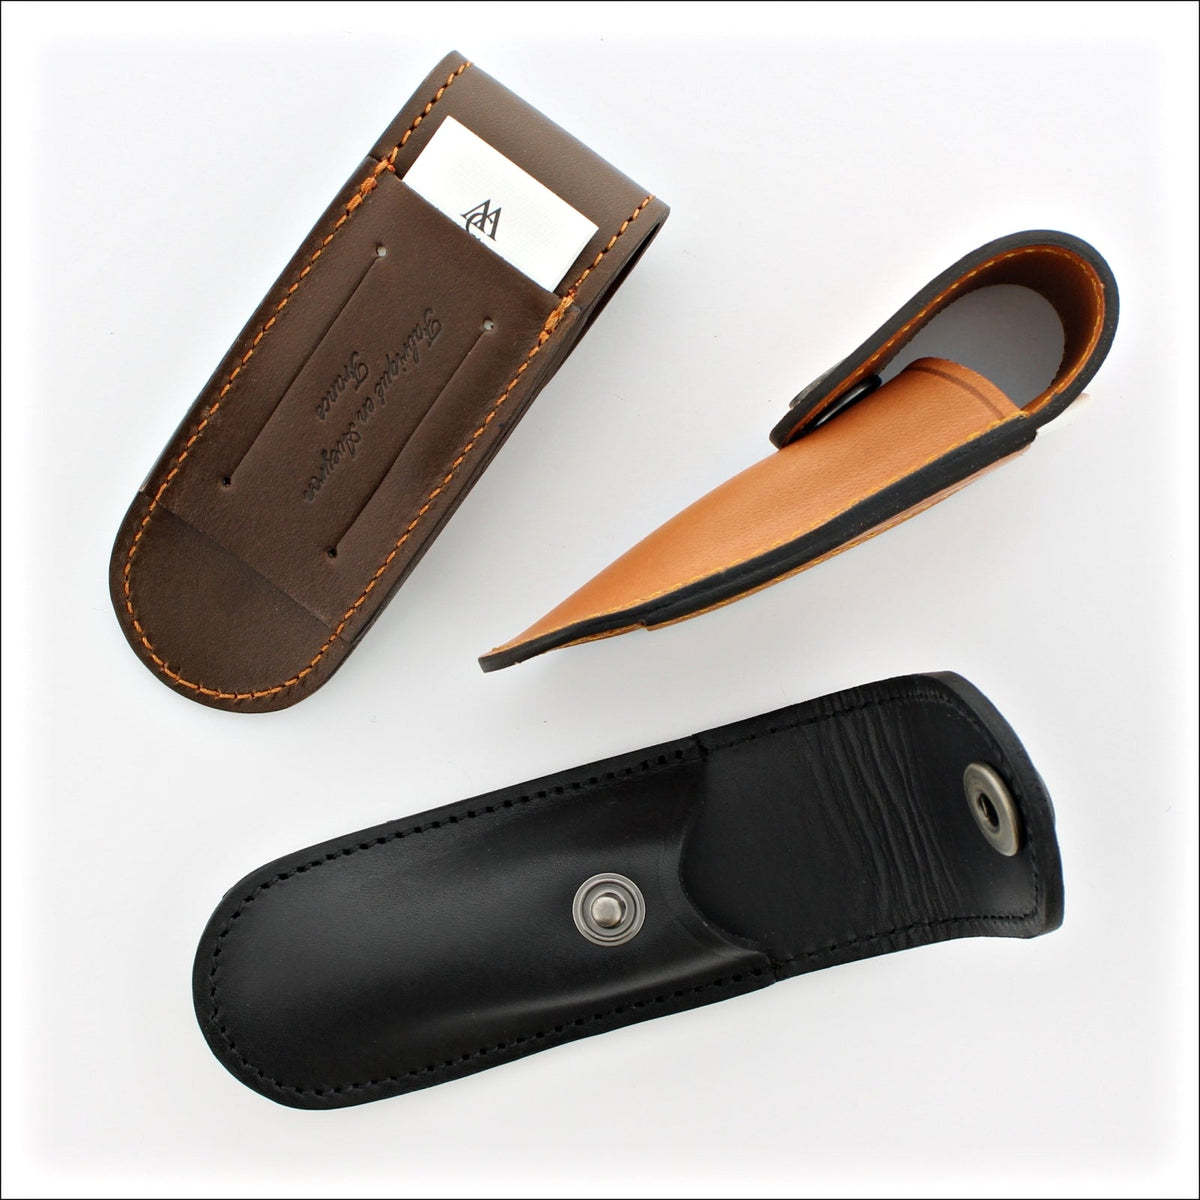 S100 Leather Sheath for 9 to 13 cm Knives